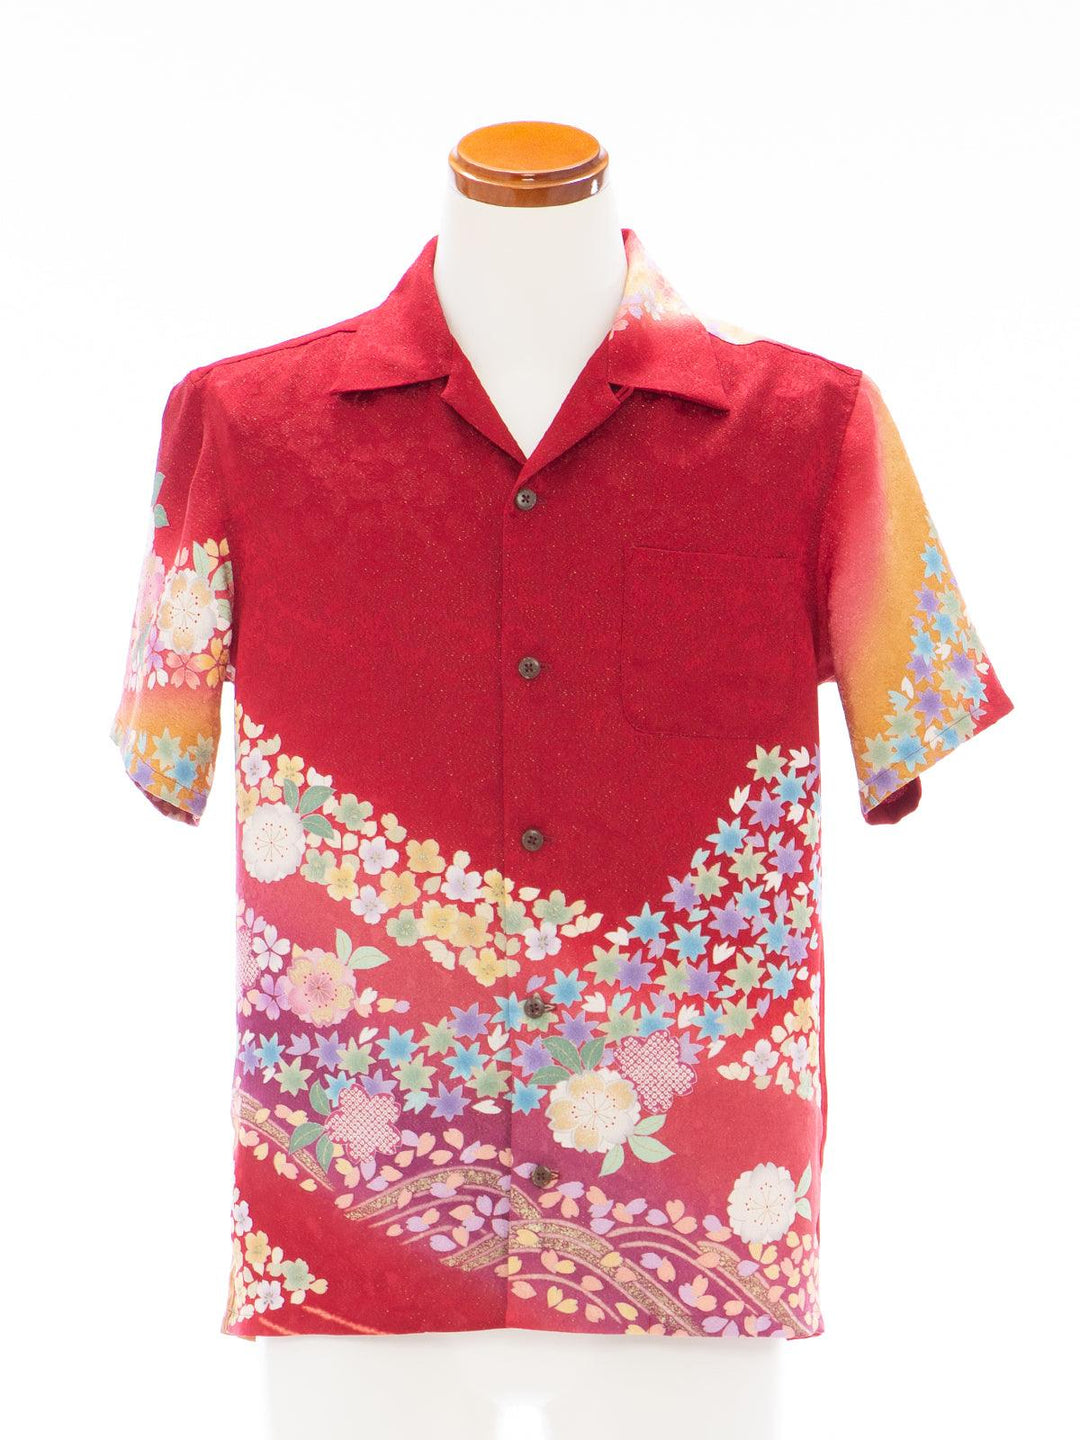 CHEMISE KIMONO ALOHA 'FLOWING FLOWERS IN RED A' AH100159 - CHEMISE KIMONO ALOHA BOUTIQUE SPÉCIALISÉE